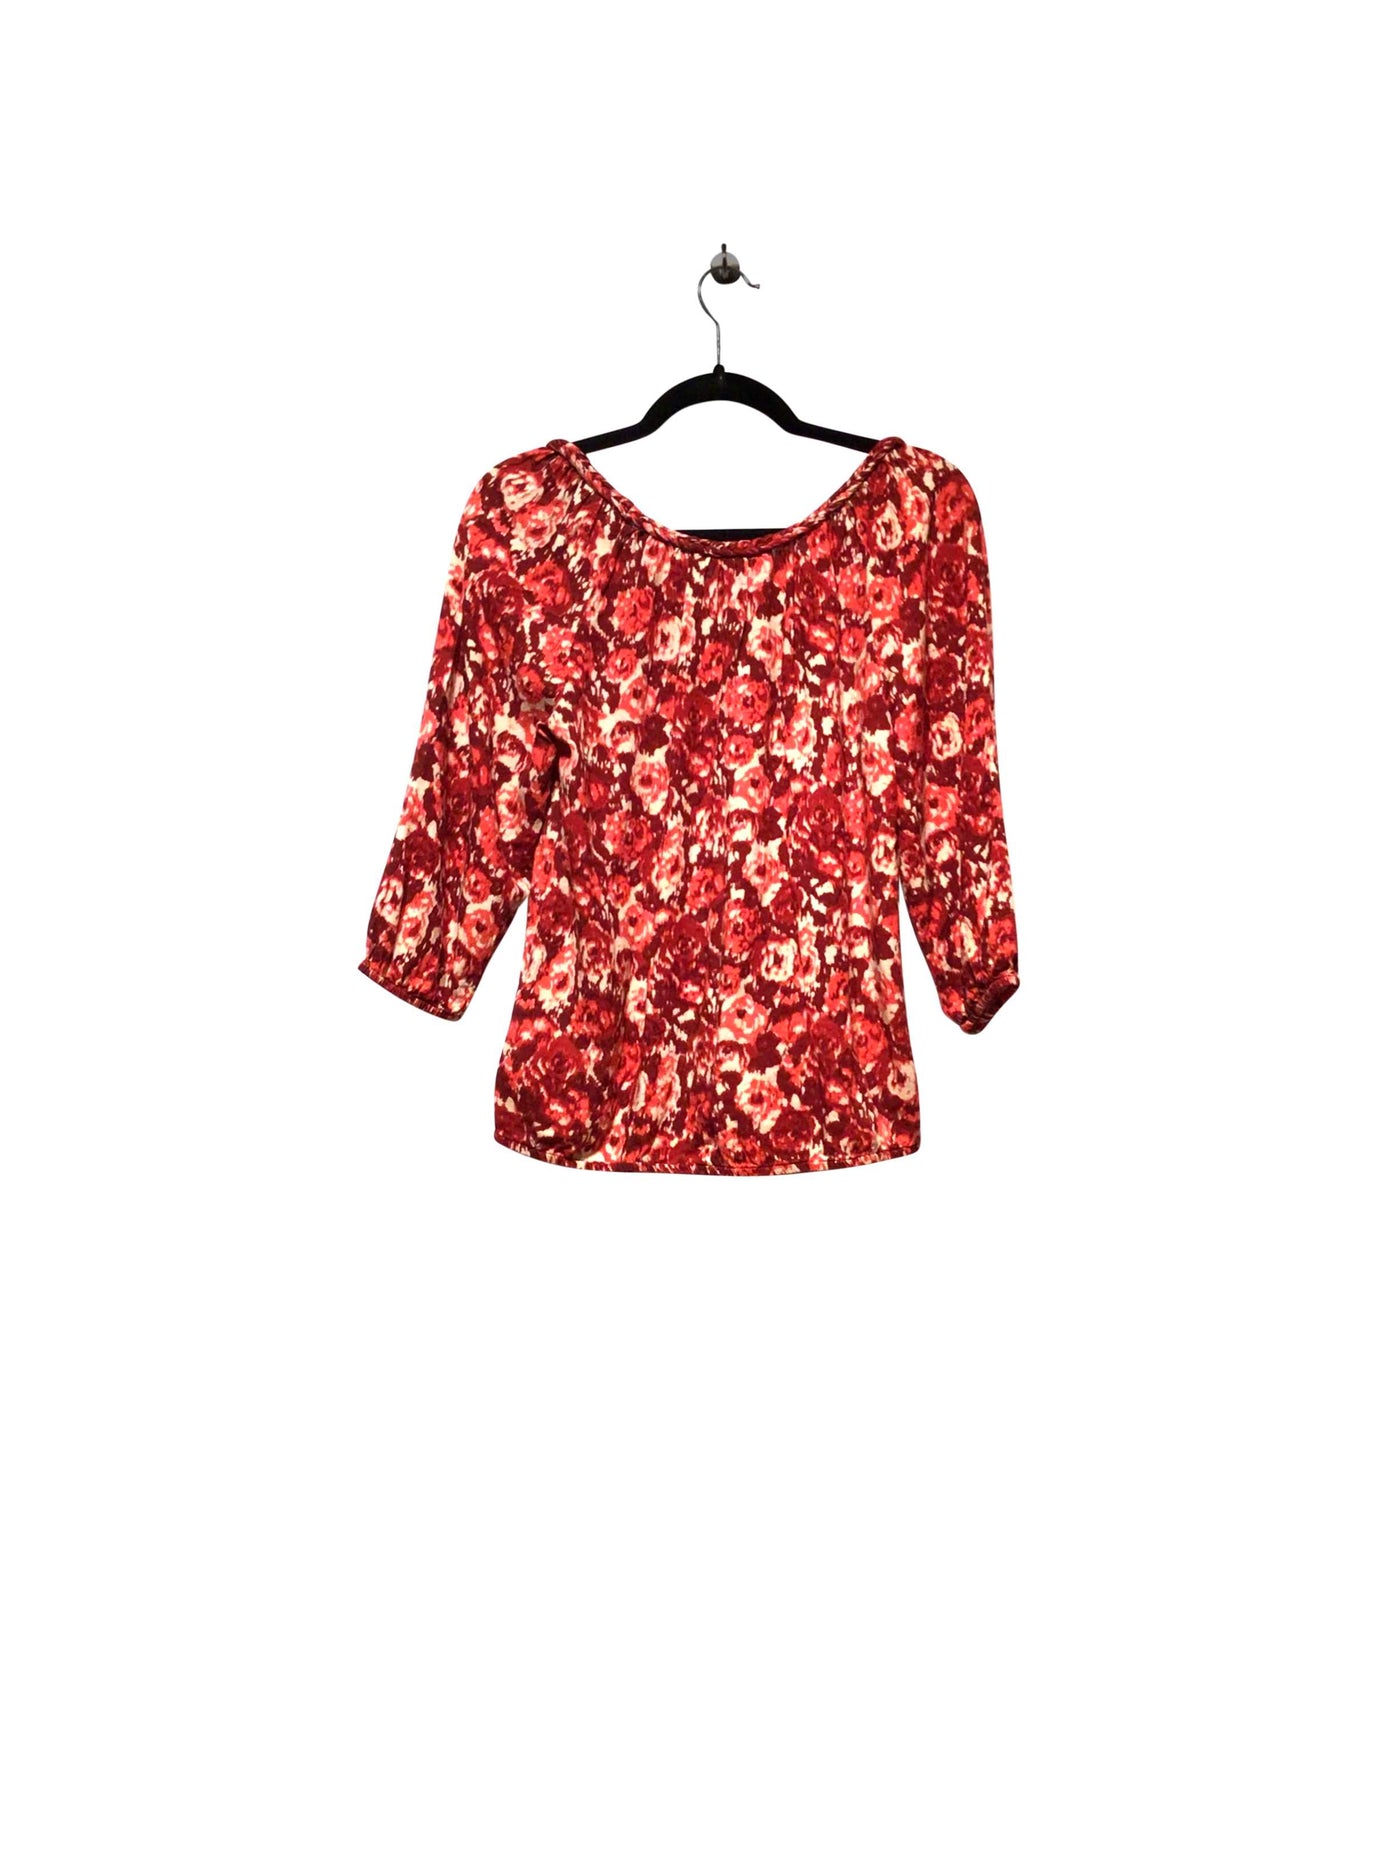 LUCKY BRAND Regular fit Blouse in Red  -  S  20.79 Koop